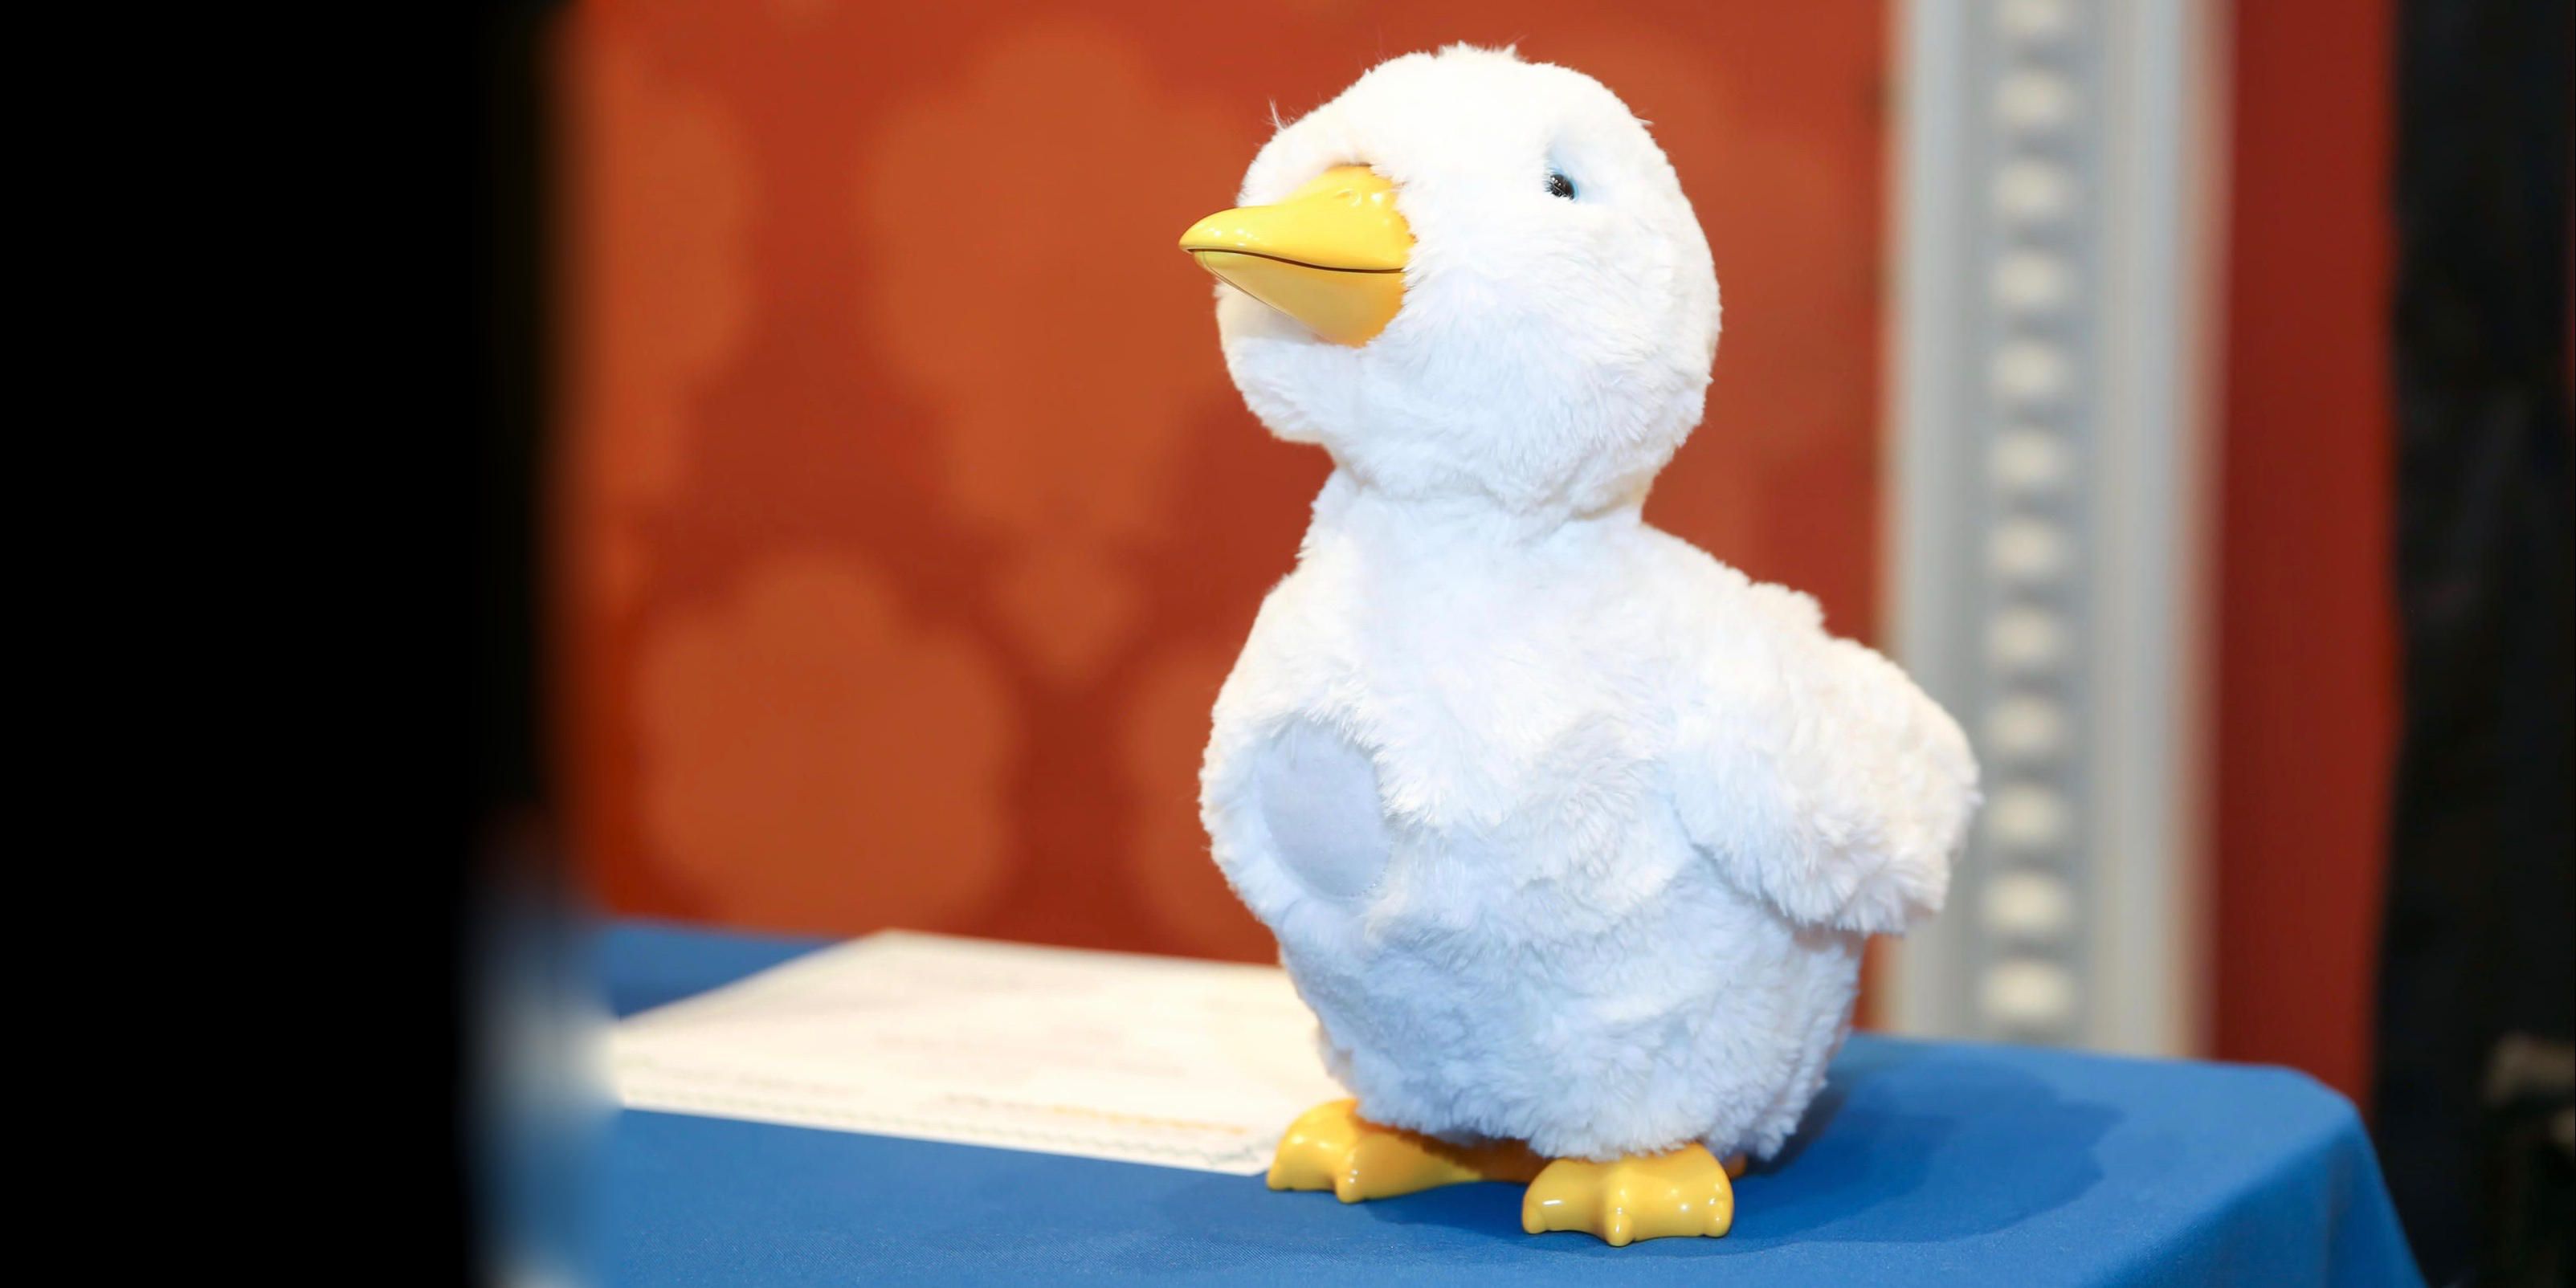 My Special Aflac Duck robot helps children cope with cancer - CNET